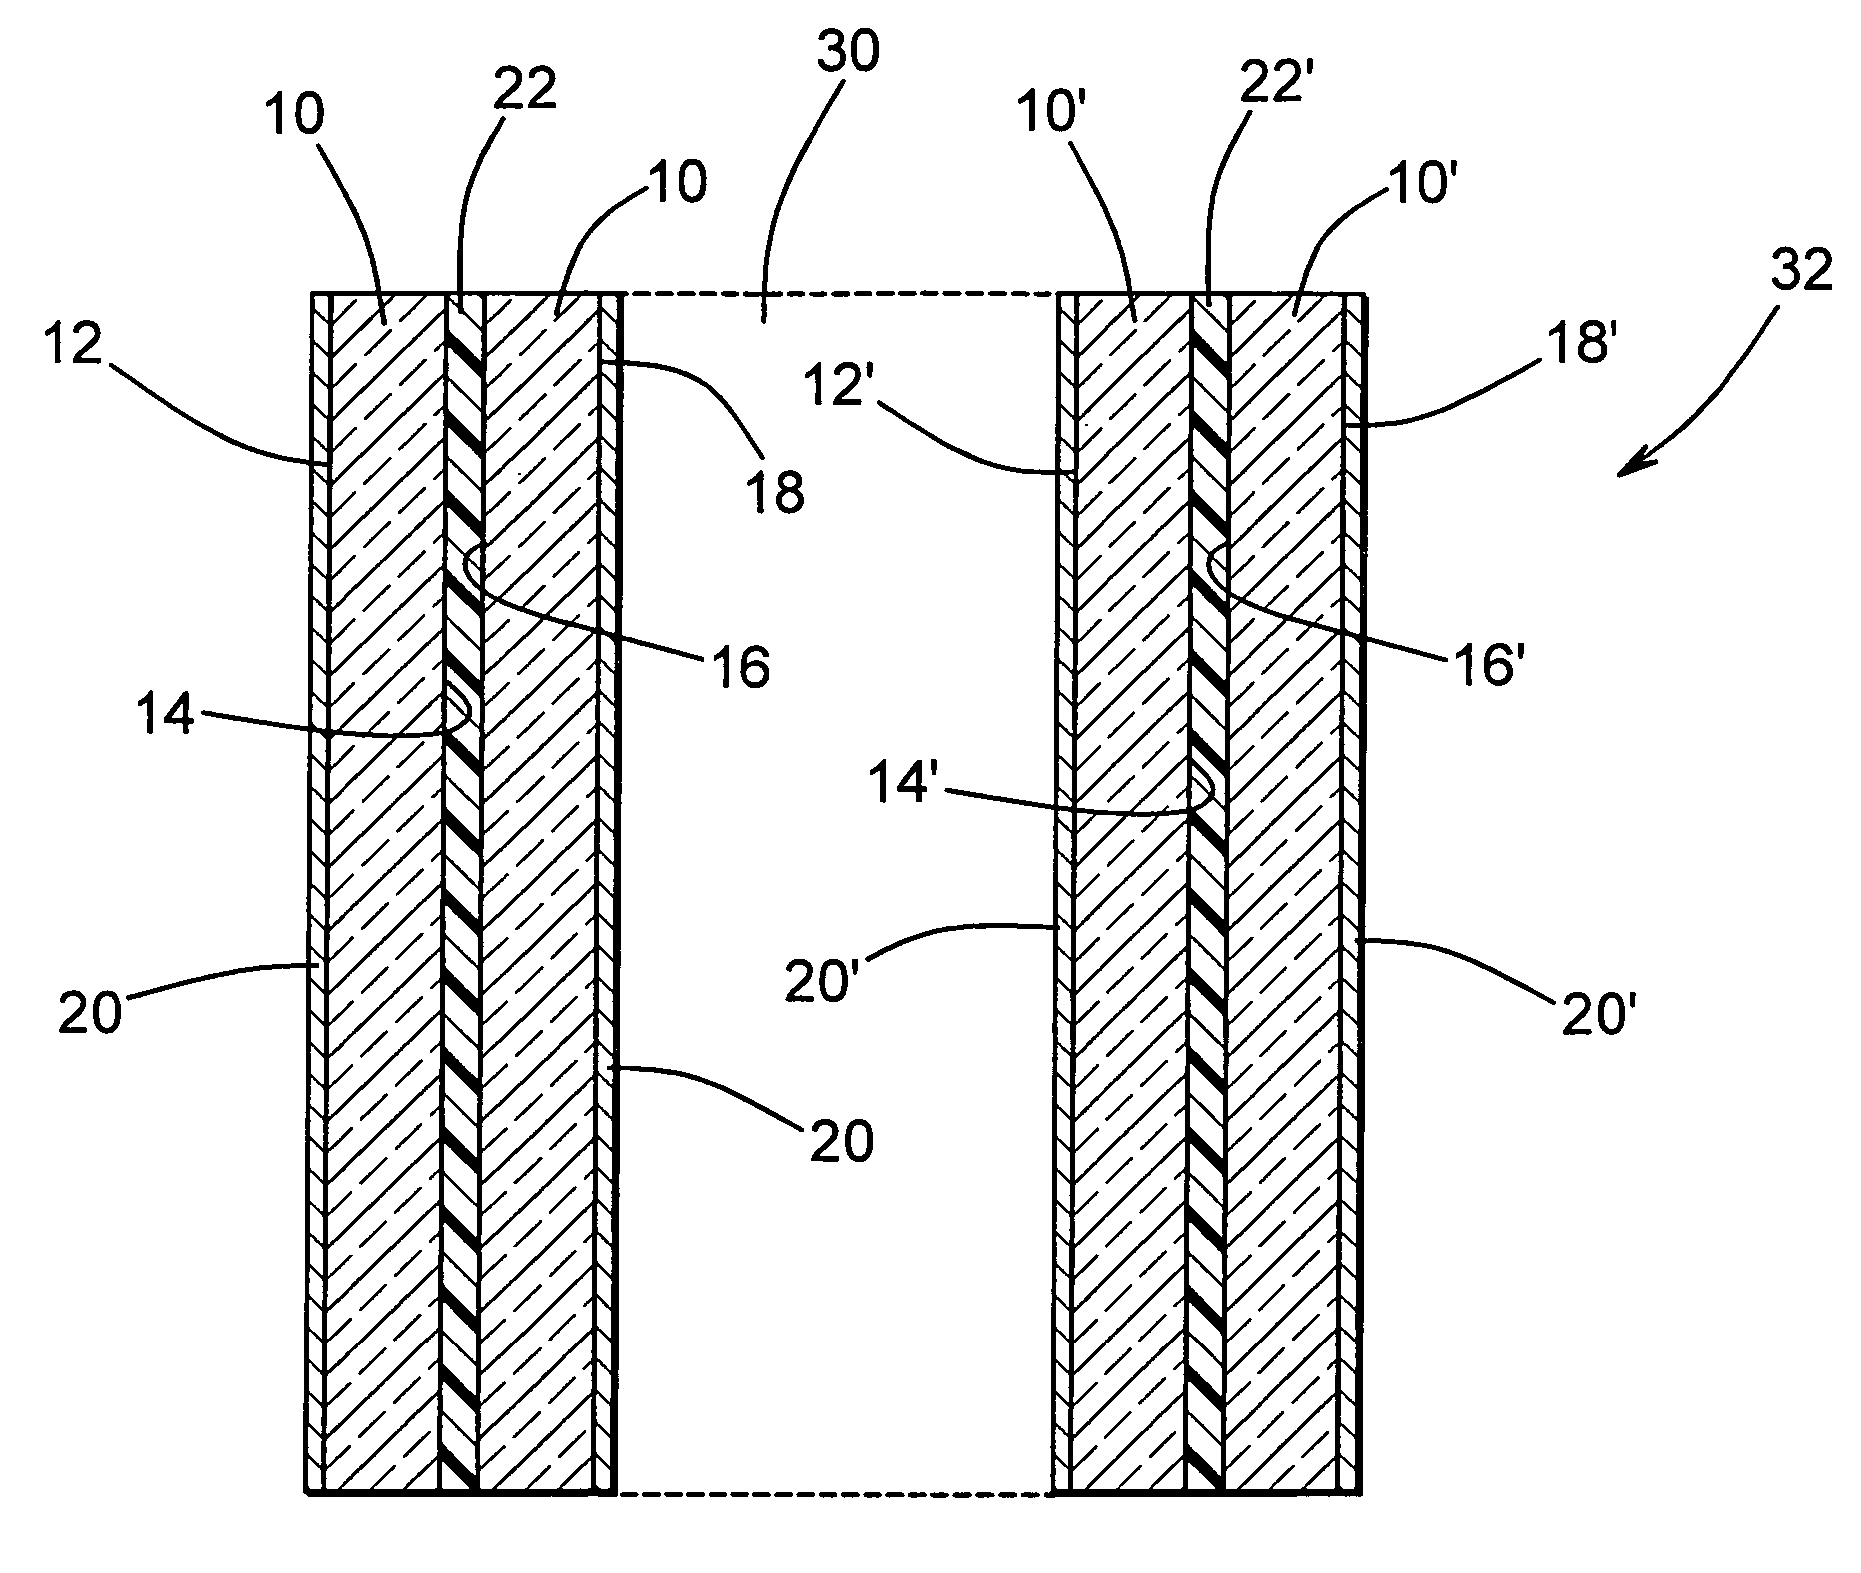 Anti-reflective, thermally insulated glazing articles